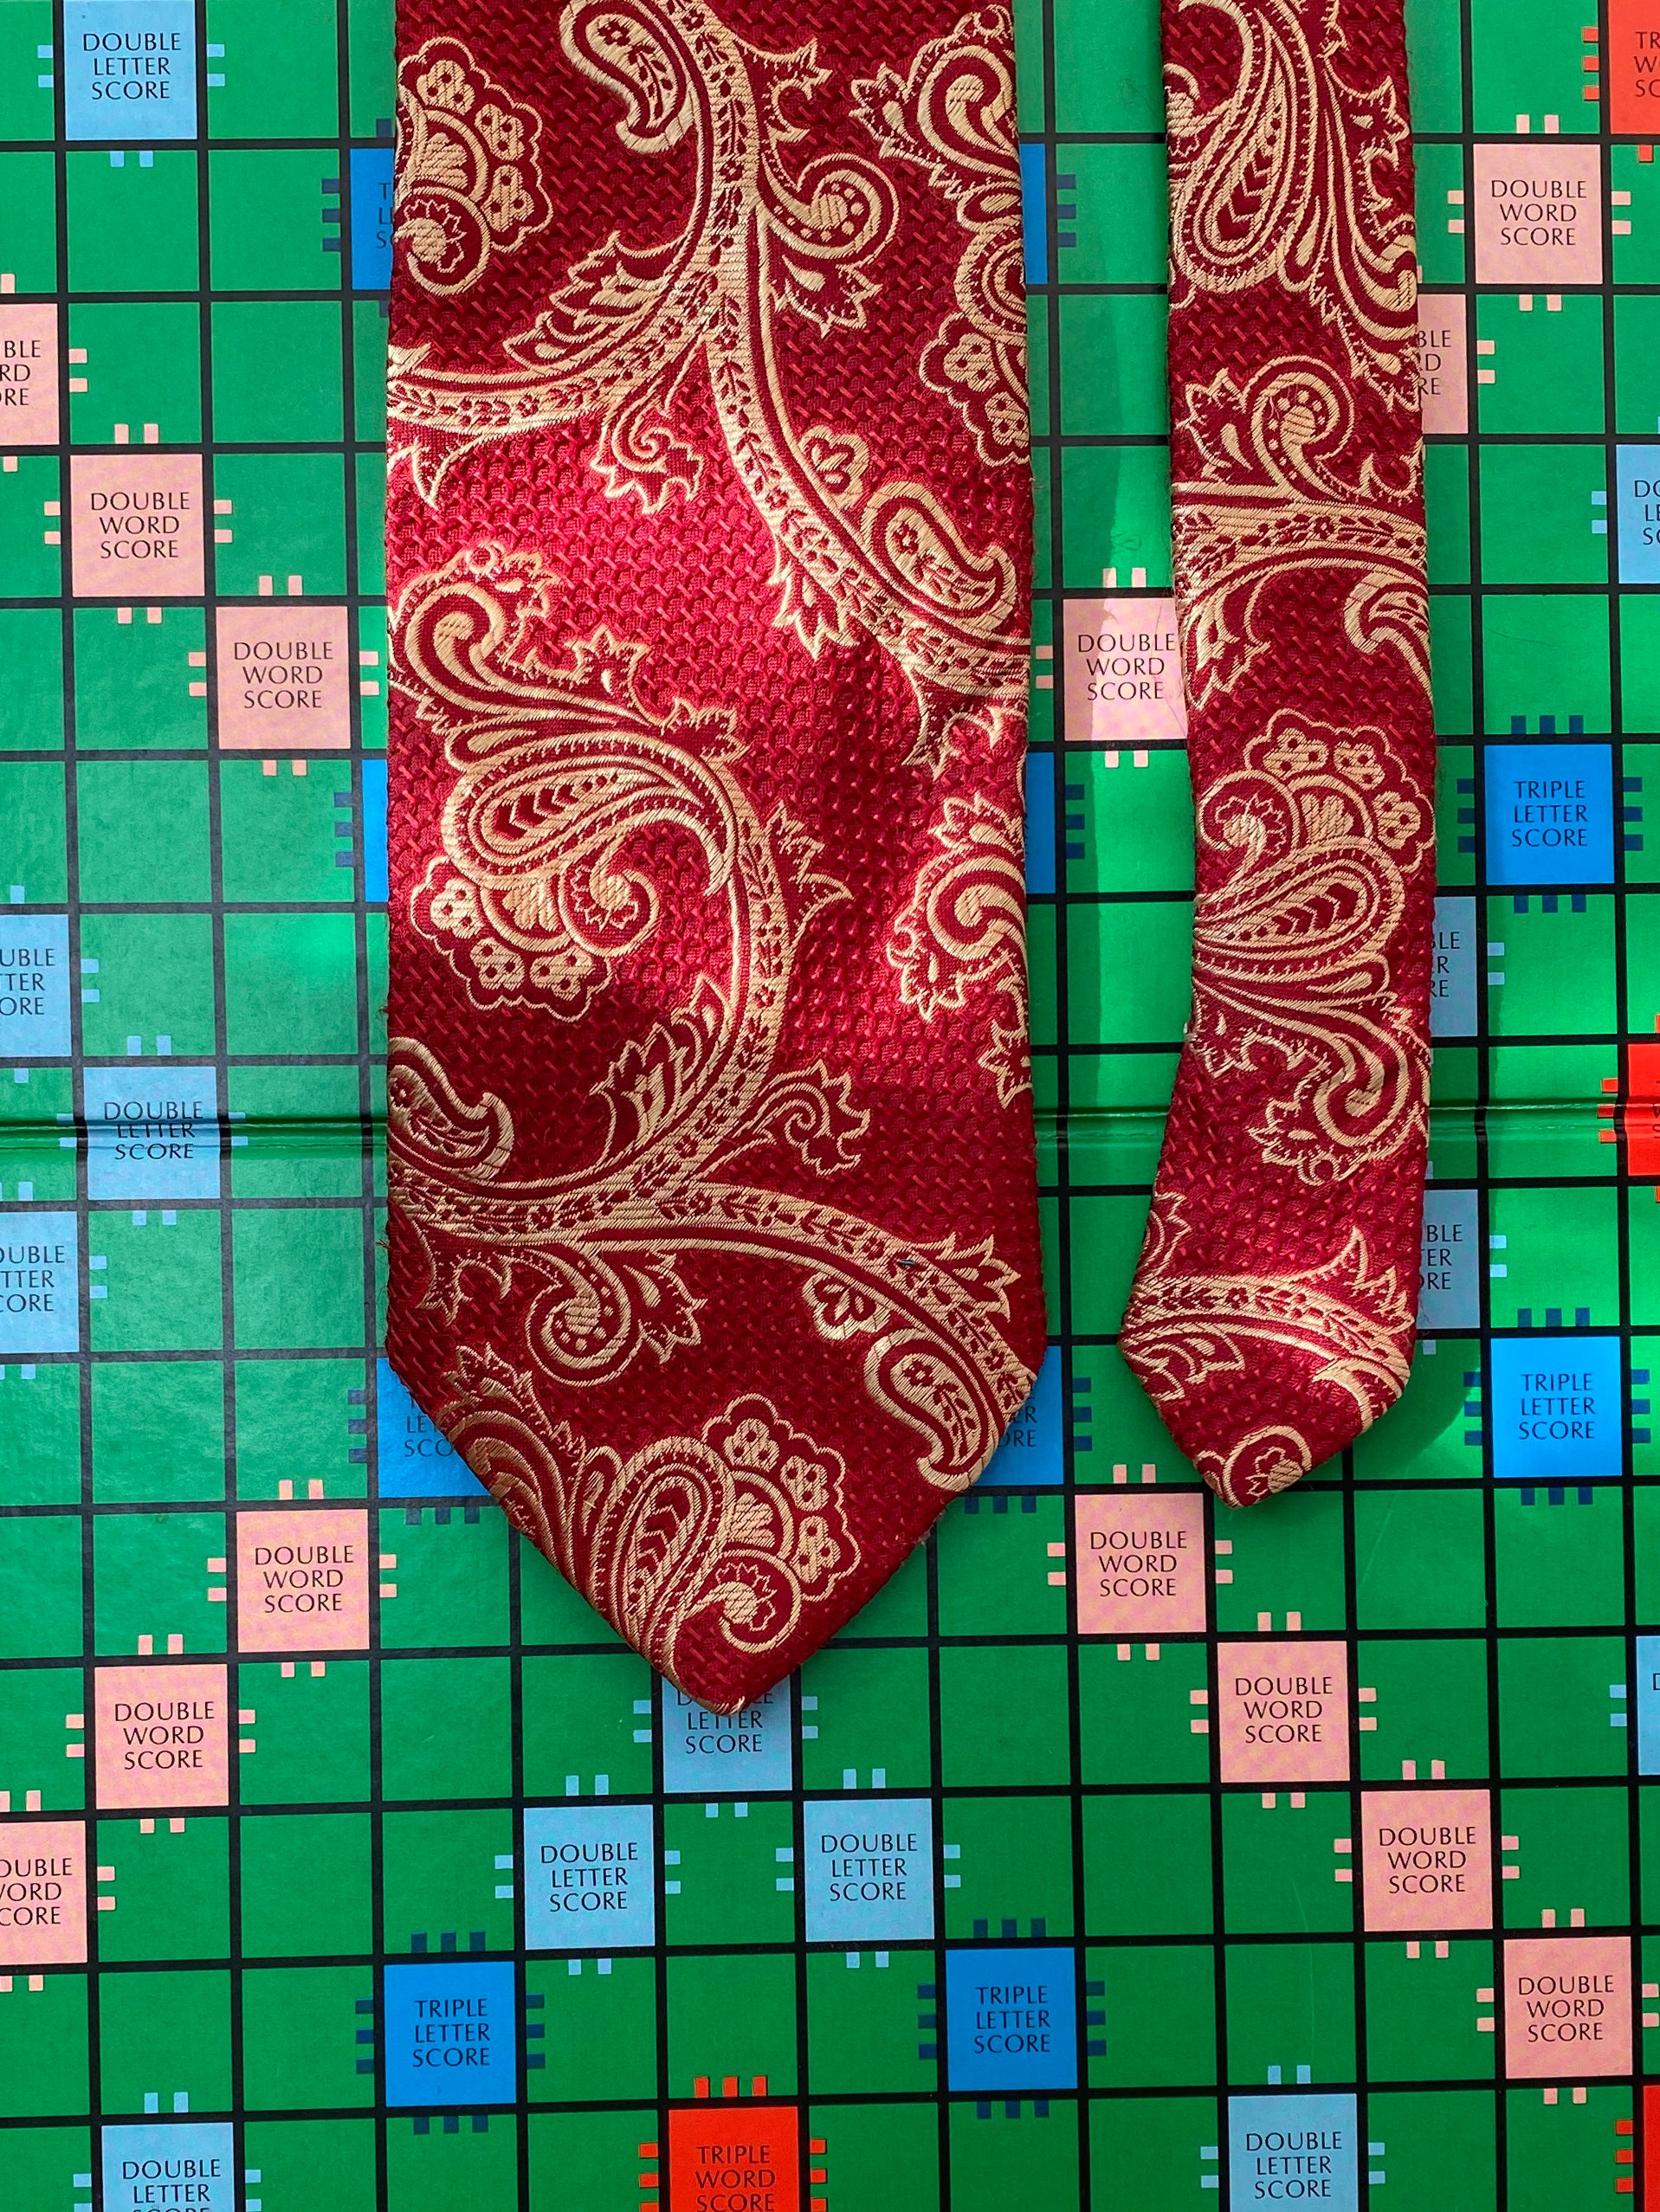 Favourbrook Red & Gold Paisley Silk Tie